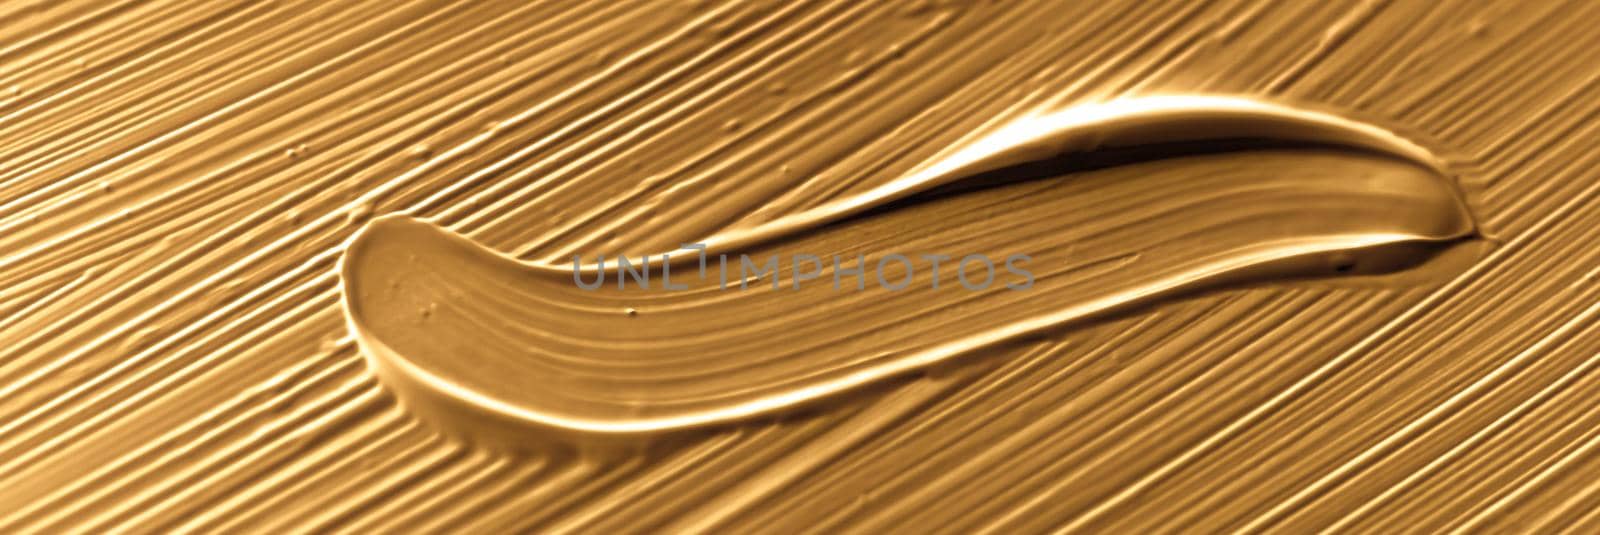 Art, branding and makeup concept - Cosmetics abstract texture background, golden acrylic paint brush stroke, textured cream product as make-up backdrop for luxury beauty brand, holiday banner design